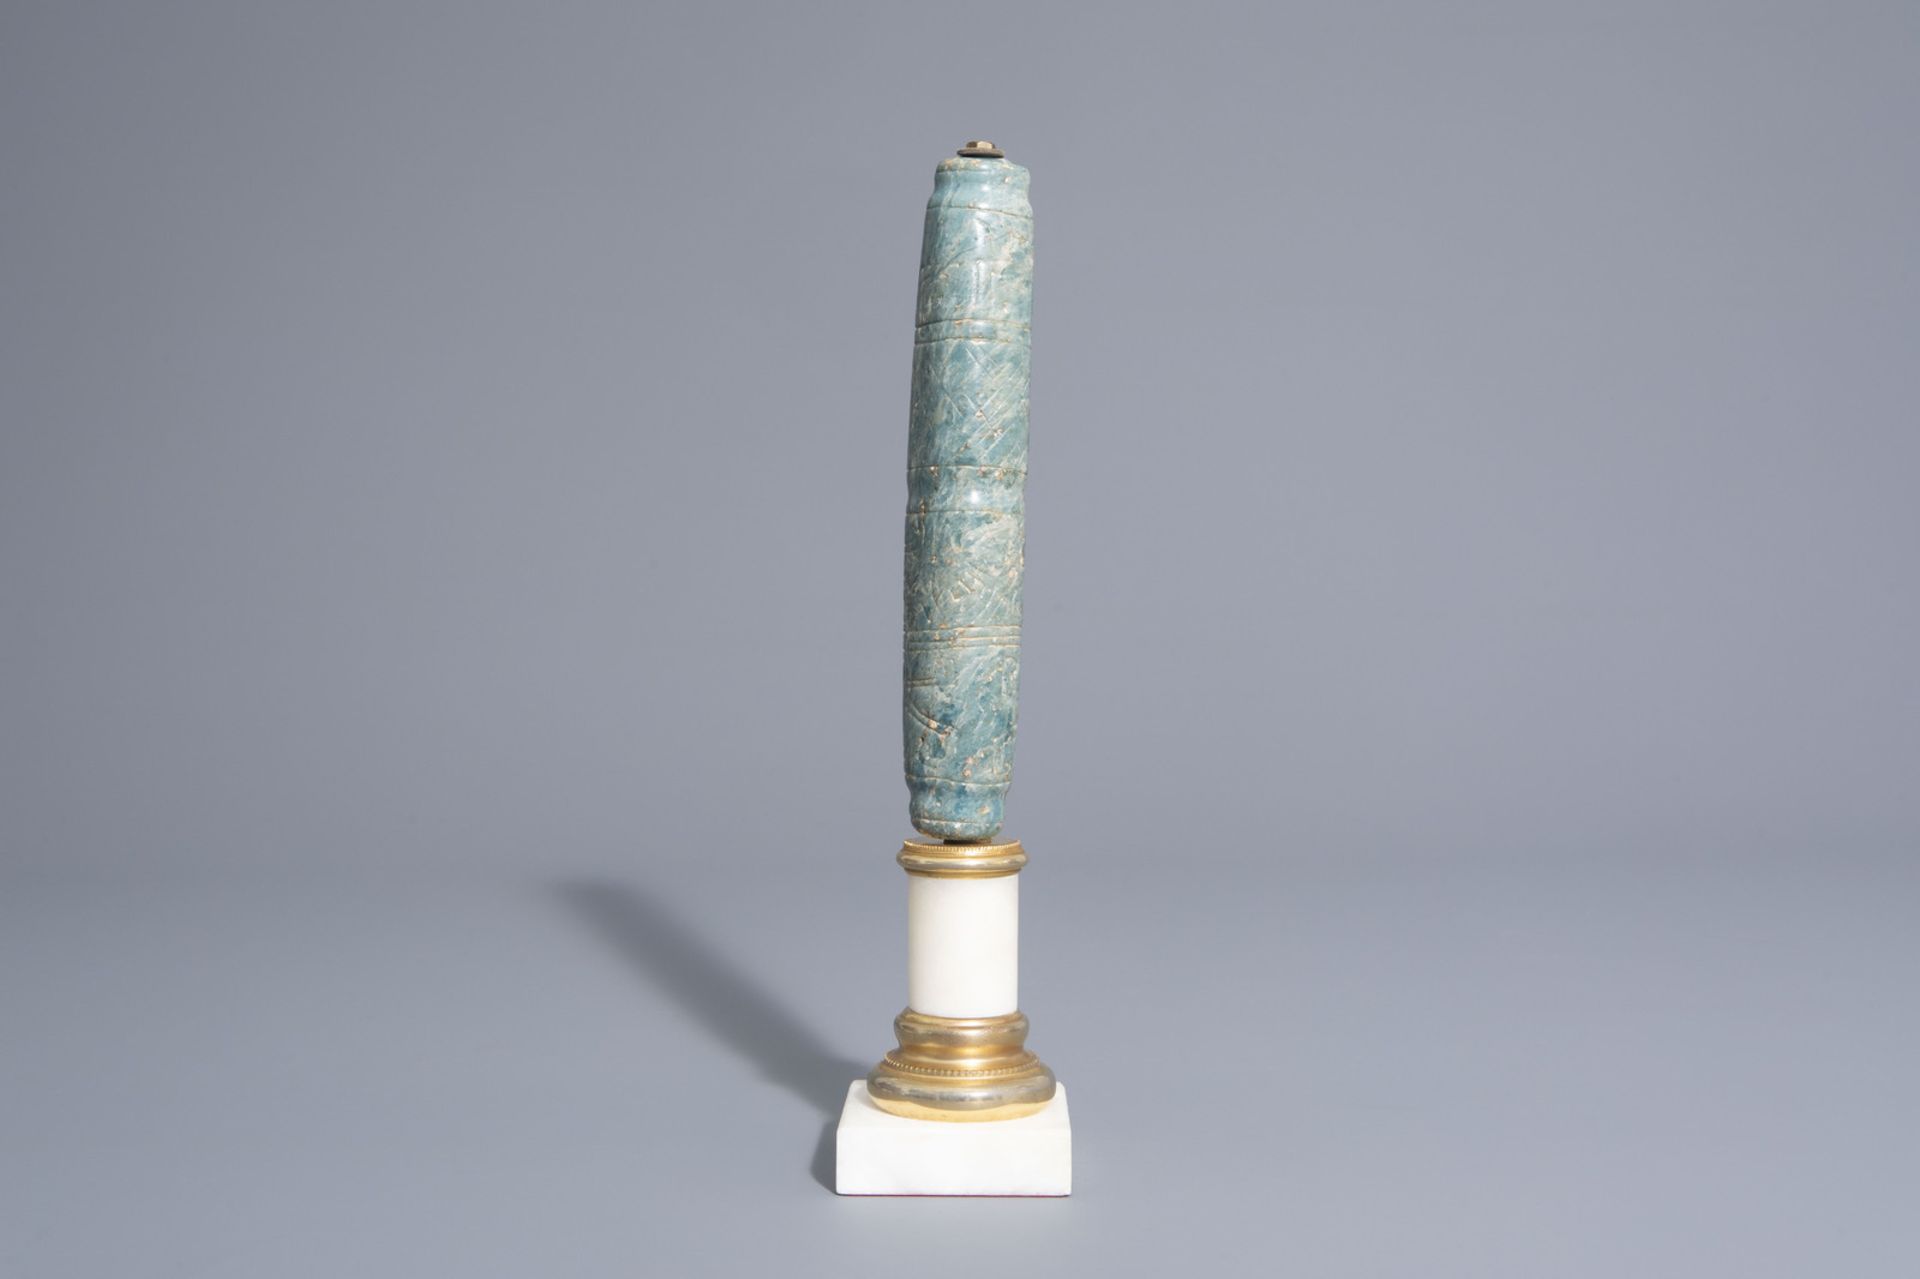 A Mexican dark green jade pipe on base, possibly Maya culture, 15th C. or later - Image 2 of 7